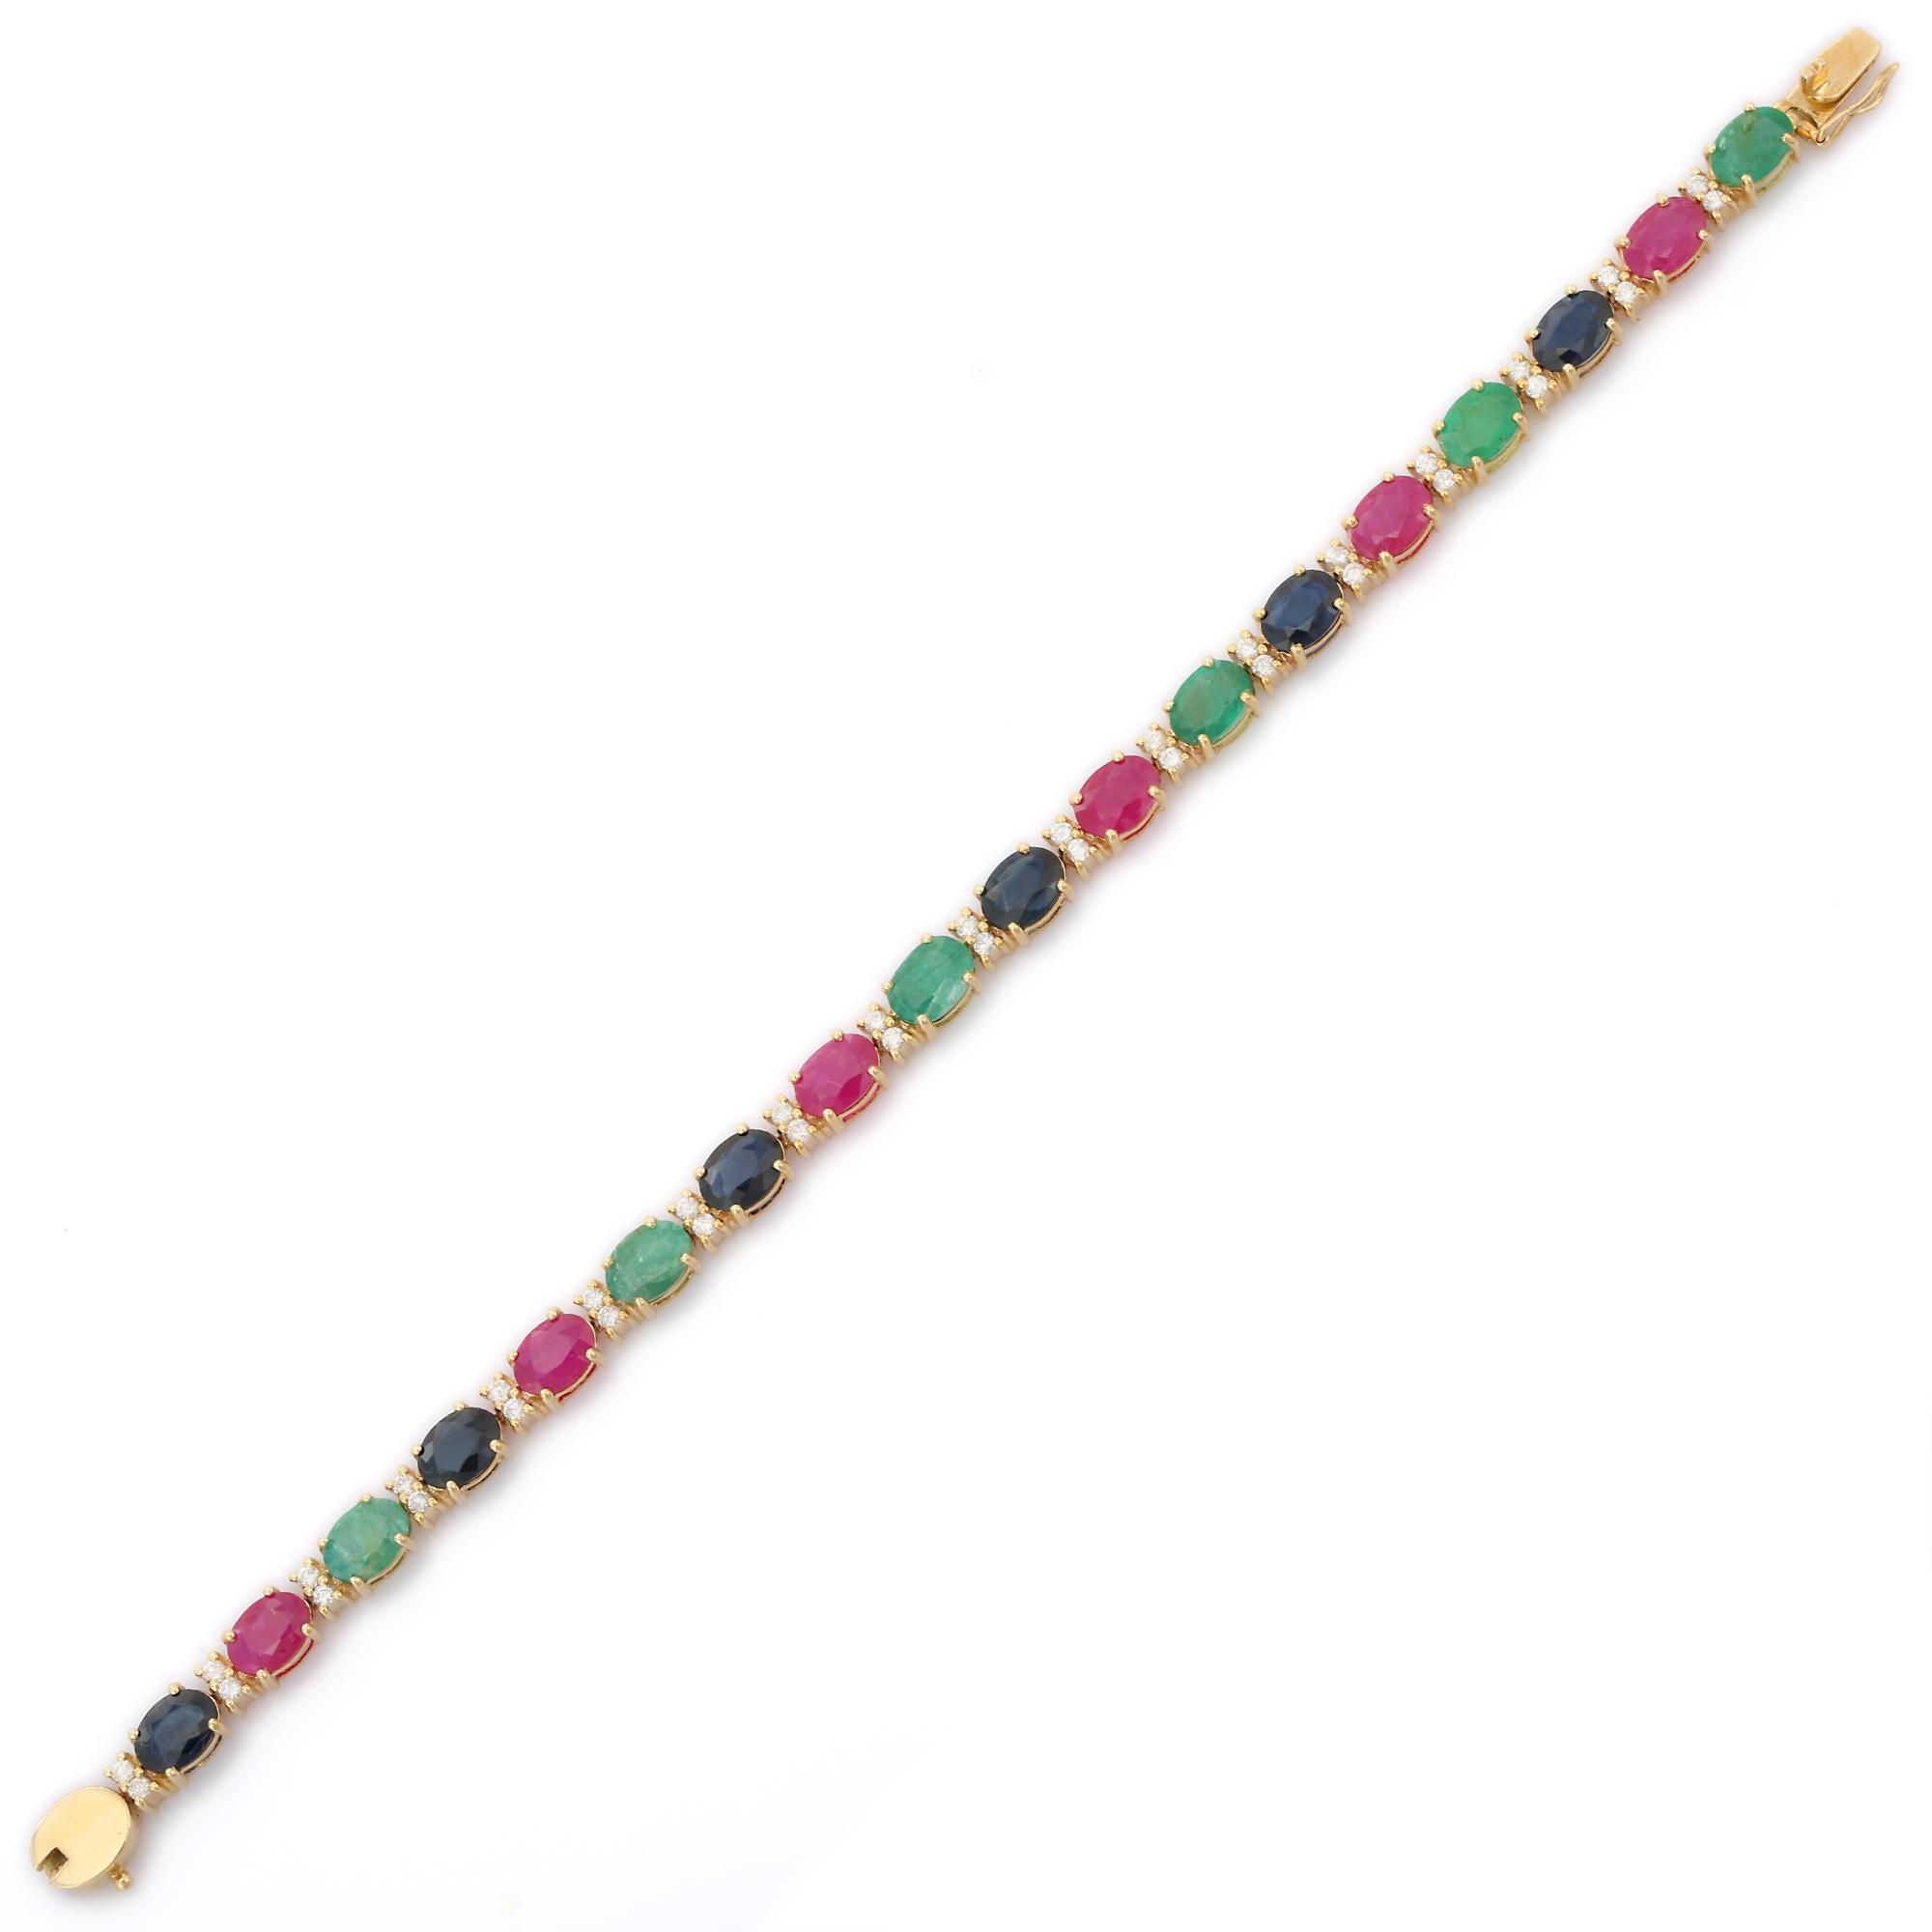 This Glamorous Emerald, Ruby and Sapphire Tennis Bracelet with Diamonds in 14K gold showcases 18 endlessly sparkling natural emerald, ruby, sapphire, weighing 15.01 carat. It measures 7.25 inches long in length. 
Emerald enhances intellectual